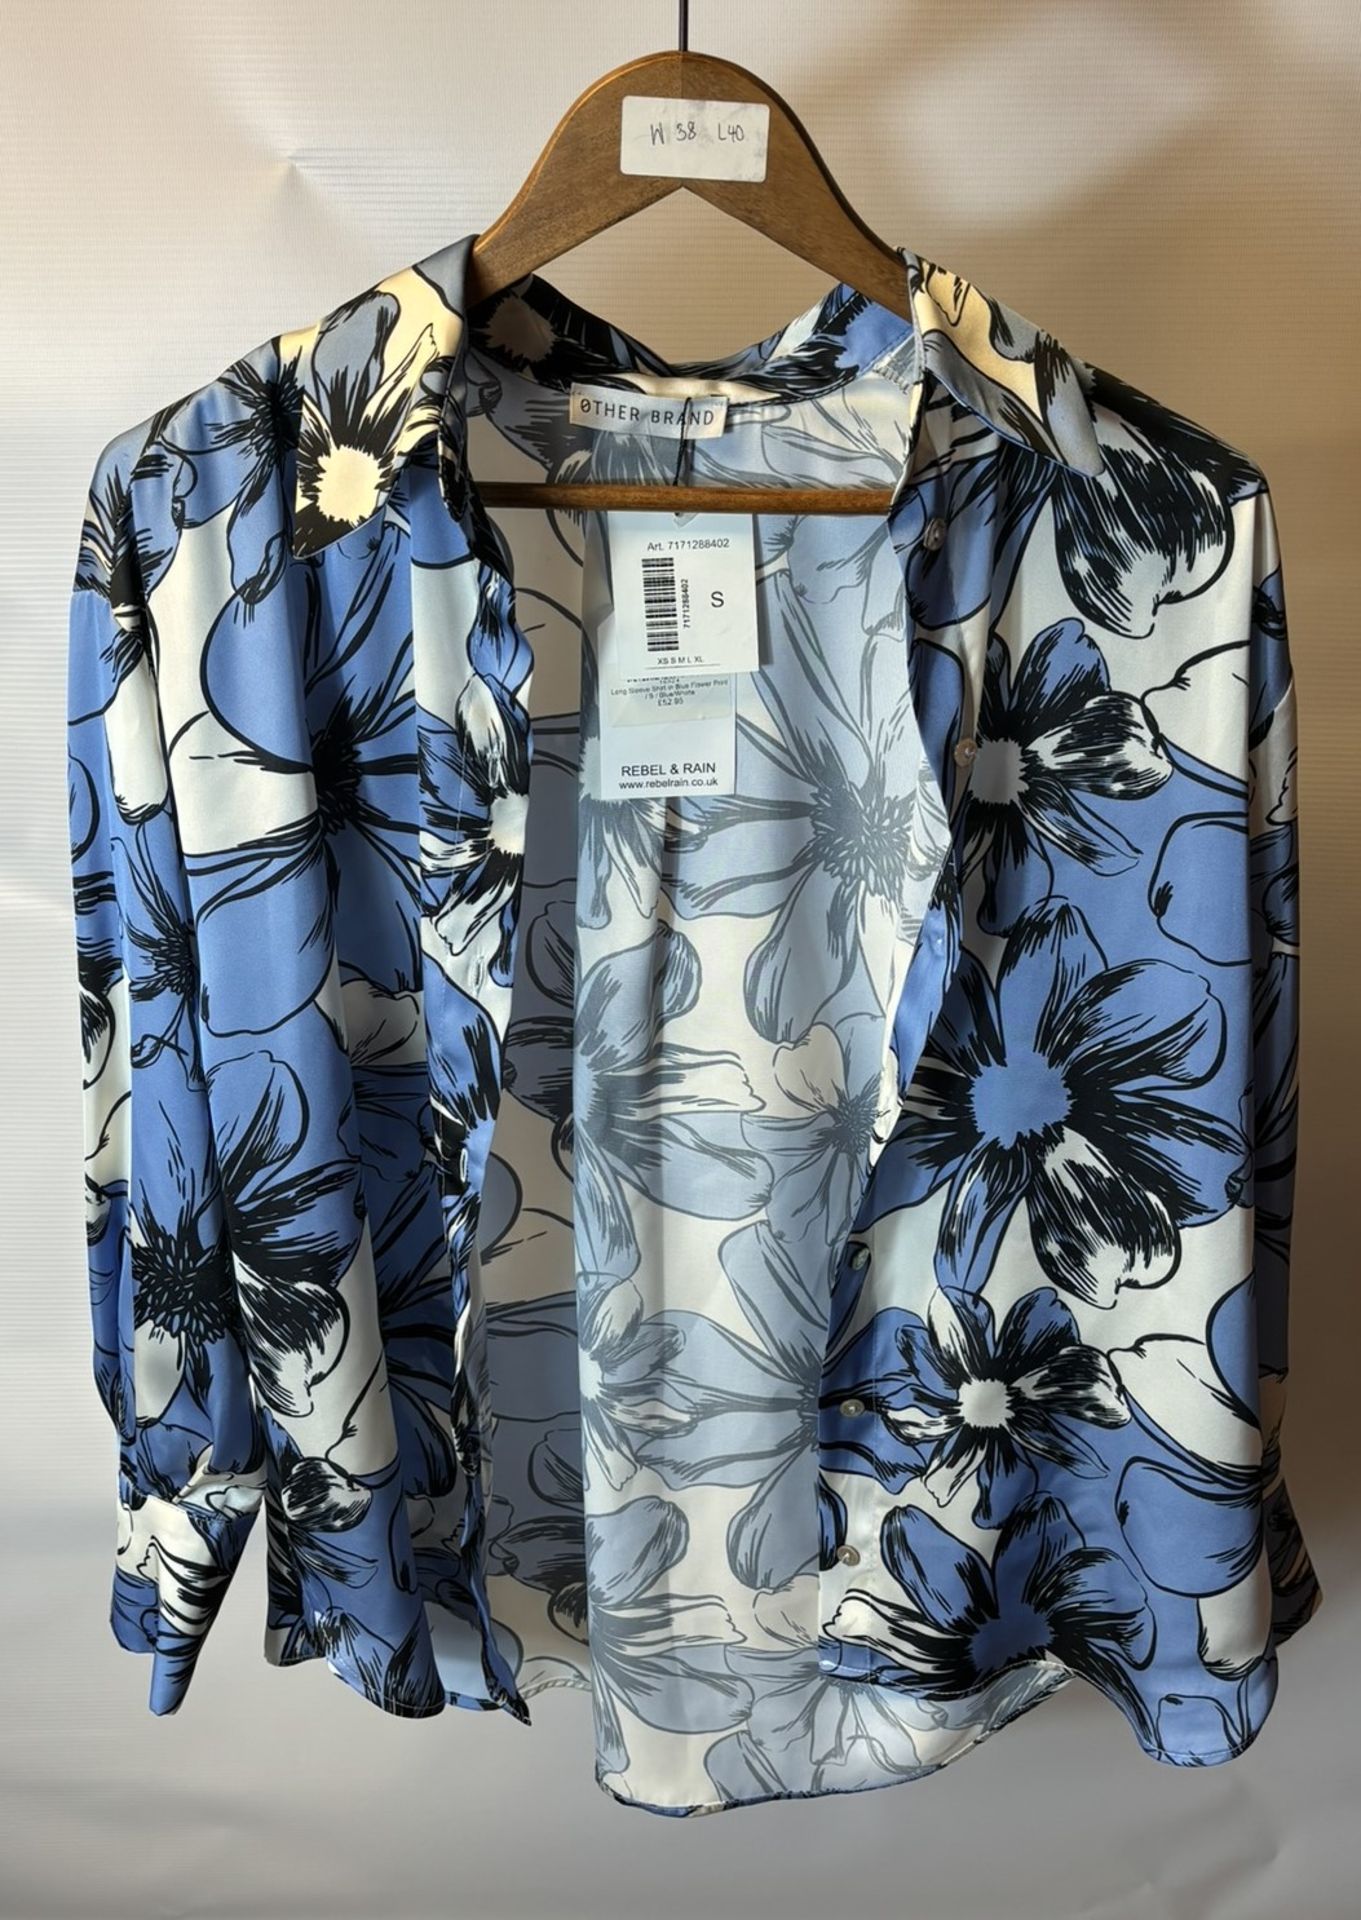 8 x Various Women's Dresses / Blouses / Blazers & Shirts As Seen In Photos - Image 22 of 24